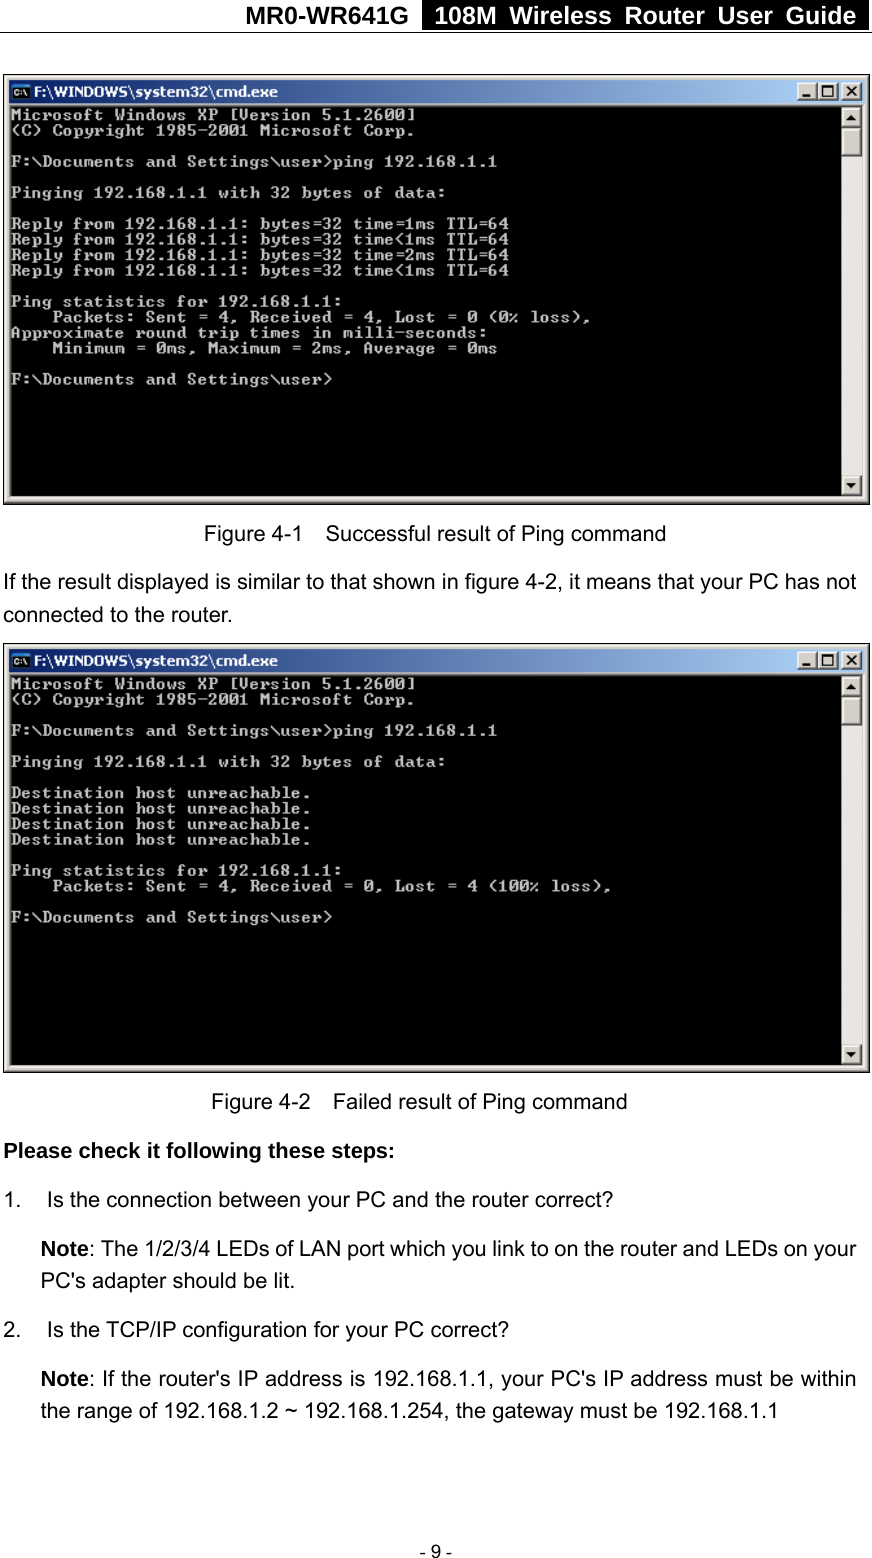 MR0-WR641G   108M Wireless Router User Guide    Figure 4-1    Successful result of Ping command If the result displayed is similar to that shown in figure 4-2, it means that your PC has not connected to the router.      Figure 4-2    Failed result of Ping command Please check it following these steps: 1.  Is the connection between your PC and the router correct? Note: The 1/2/3/4 LEDs of LAN port which you link to on the router and LEDs on your PC&apos;s adapter should be lit. 2. Is the TCP/IP configuration for your PC correct? Note: If the router&apos;s IP address is 192.168.1.1, your PC&apos;s IP address must be within the range of 192.168.1.2 ~ 192.168.1.254, the gateway must be 192.168.1.1  - 9 - 